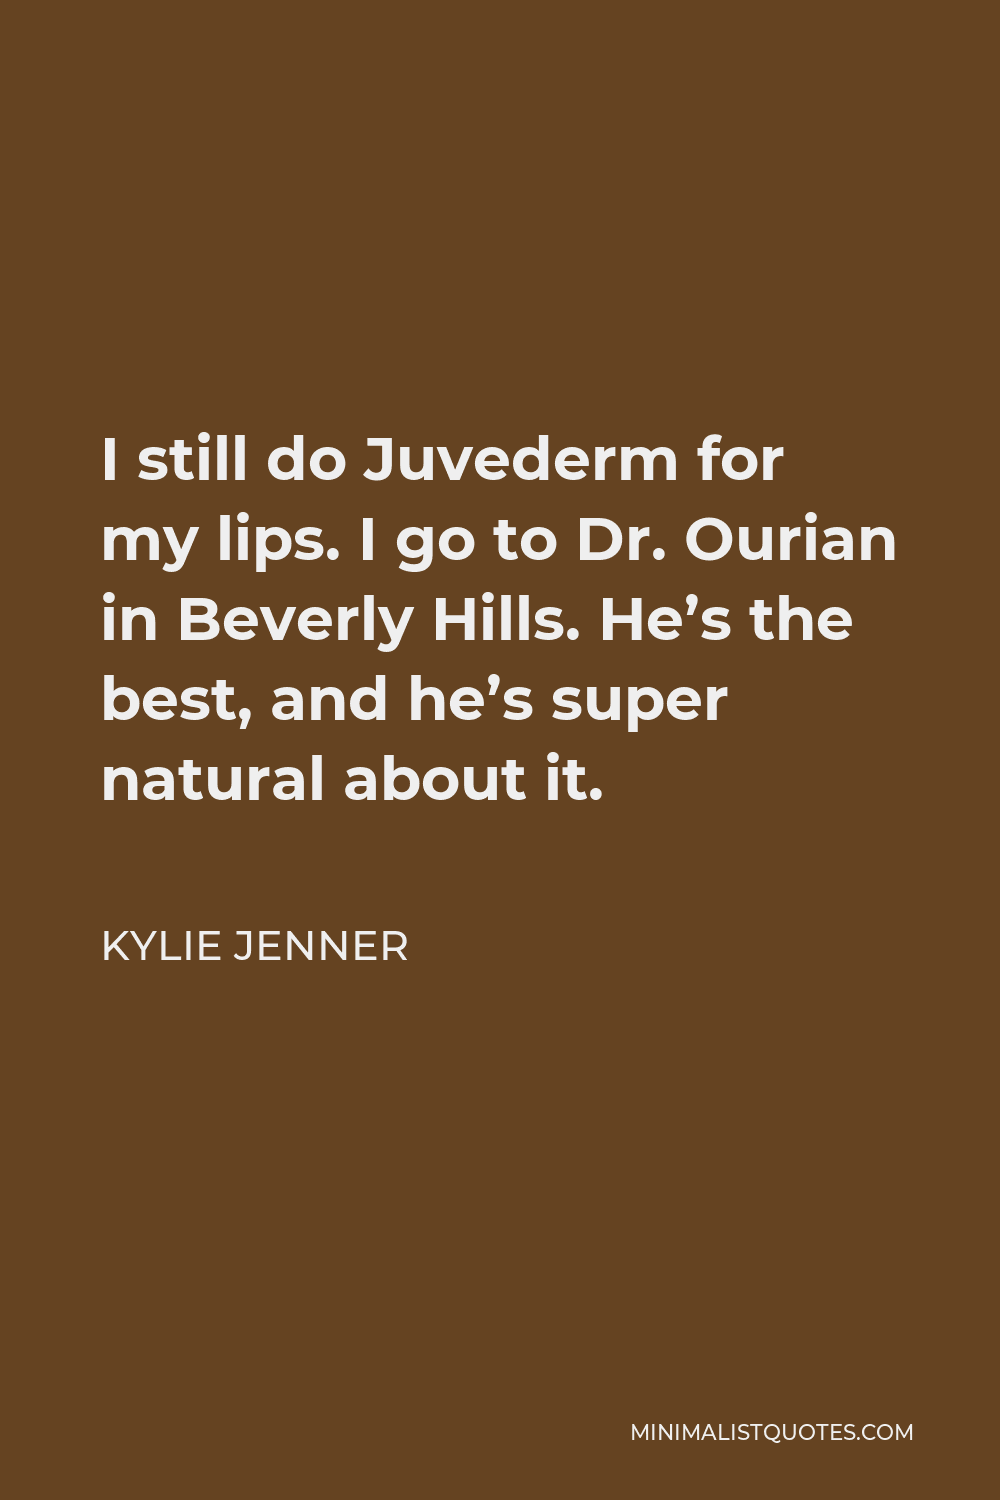 Kylie Jenner Quote - I still do Juvederm for my lips. I go to Dr. Ourian in Beverly Hills. He’s the best, and he’s super natural about it.